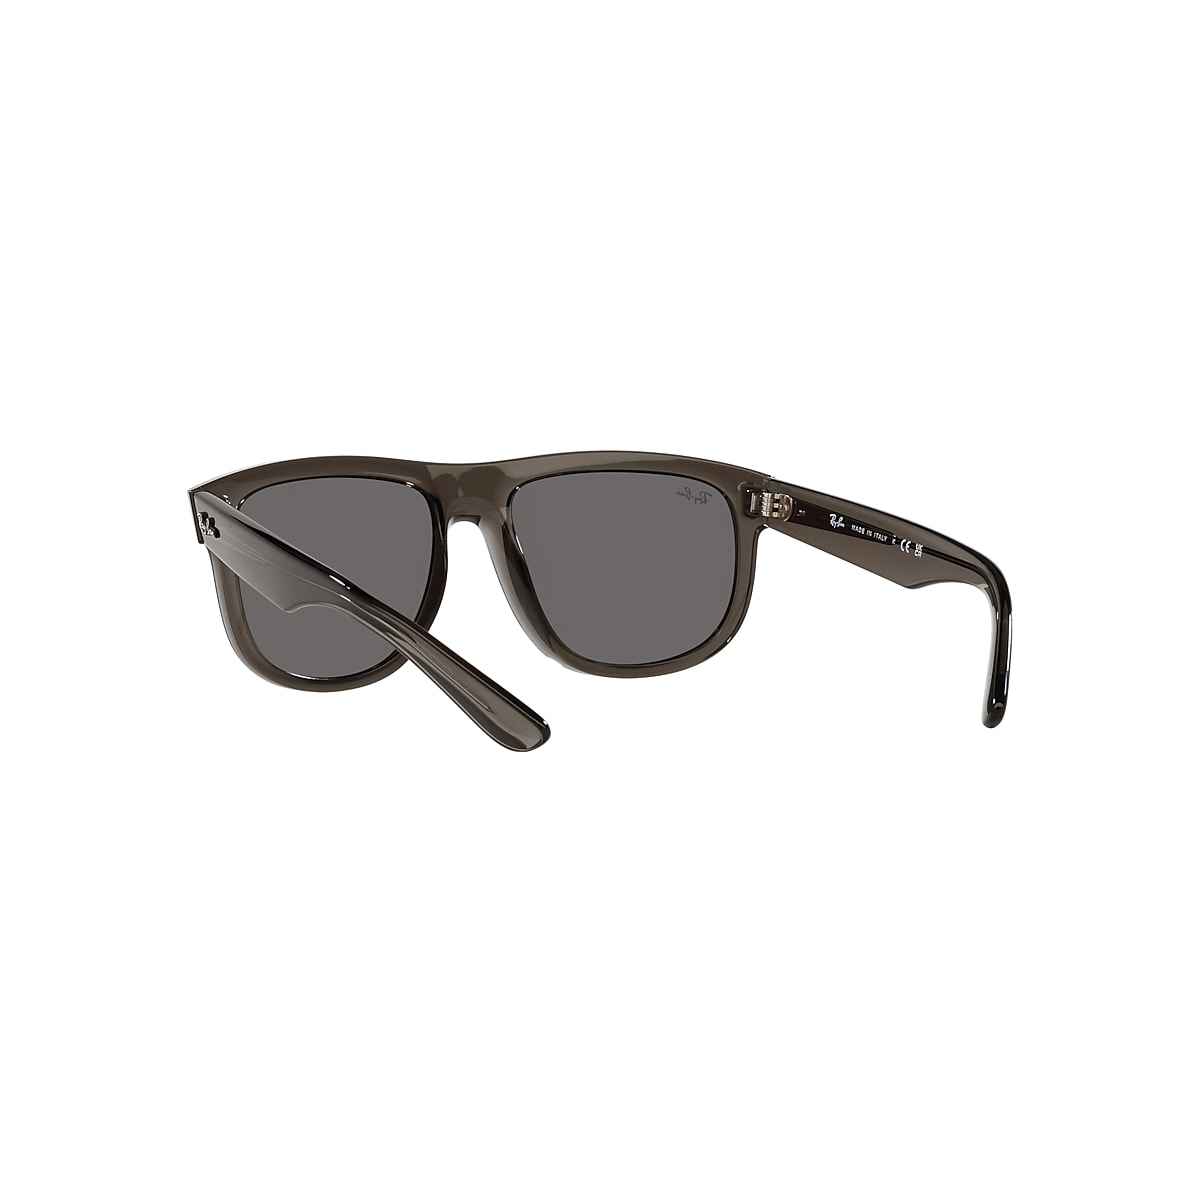 Silver - Transparent RBR0501S BOYFRIEND Grey | US Dark and Ray-Ban® in REVERSE Sunglasses